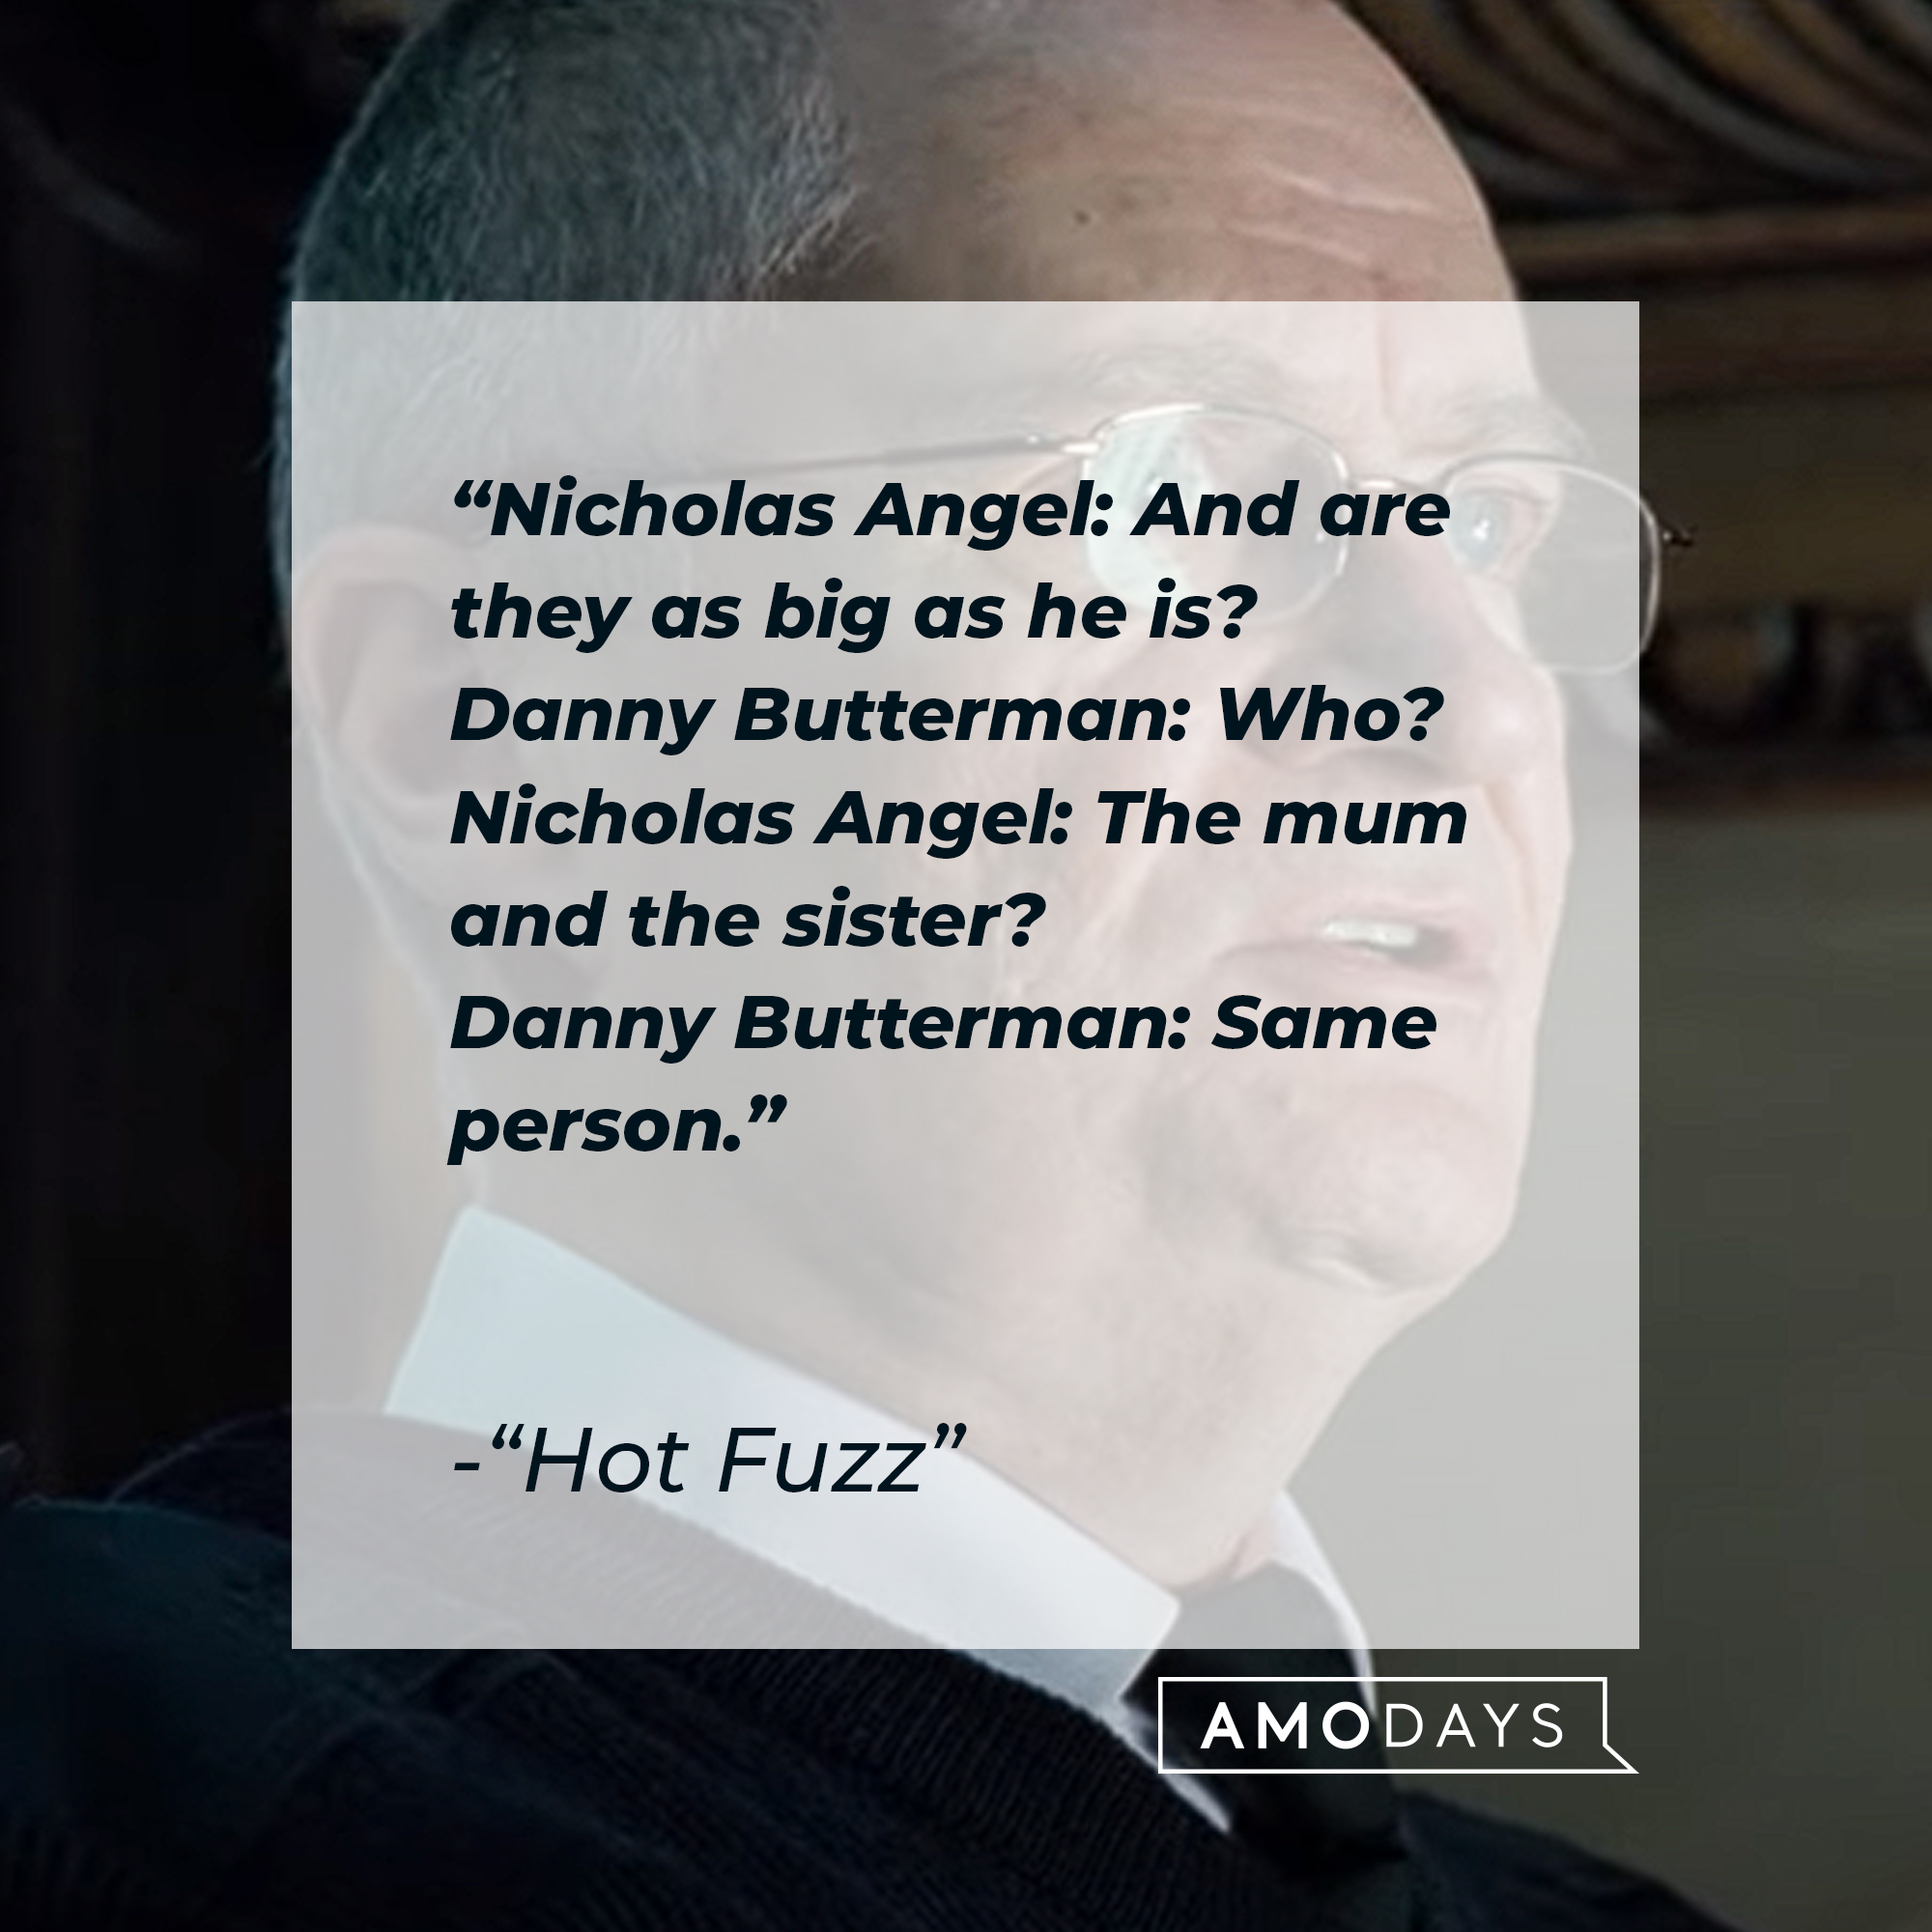 Nicholas Angel and Danny Butterman's quotes in "Hot Fuzz:" “Nicholas Angel: And are they as big as he is? Danny Butterman: Who? Nicholas Angel: The mum and the sister? Danny Butterman: Same person.” | Source: Youtube.com/UniversalPictures